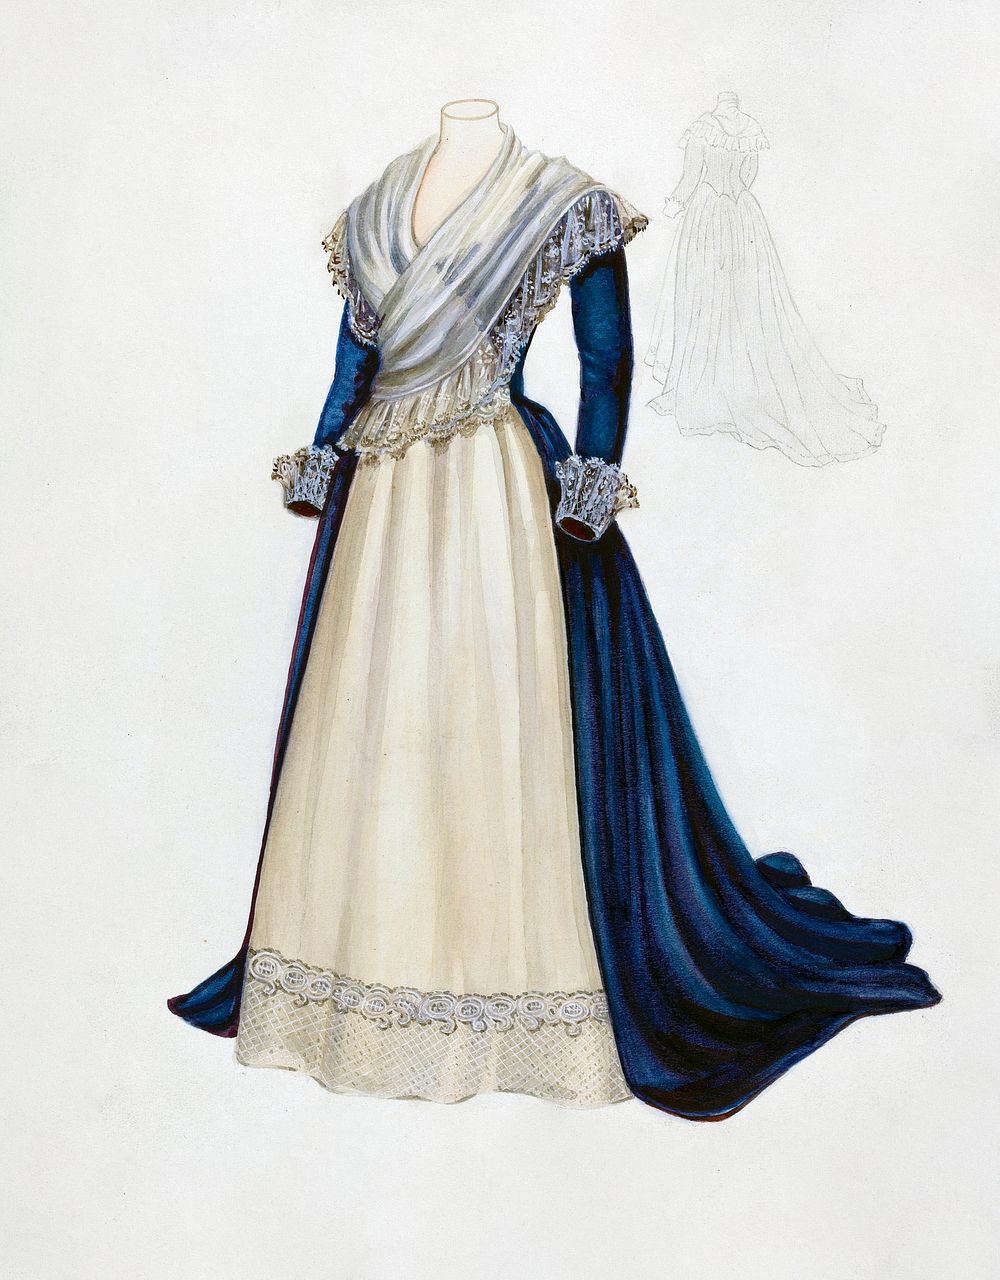 Dress (1935/1942) by Arthur Sander. Original from The National Gallery of Art. Digitally enhanced by rawpixel.